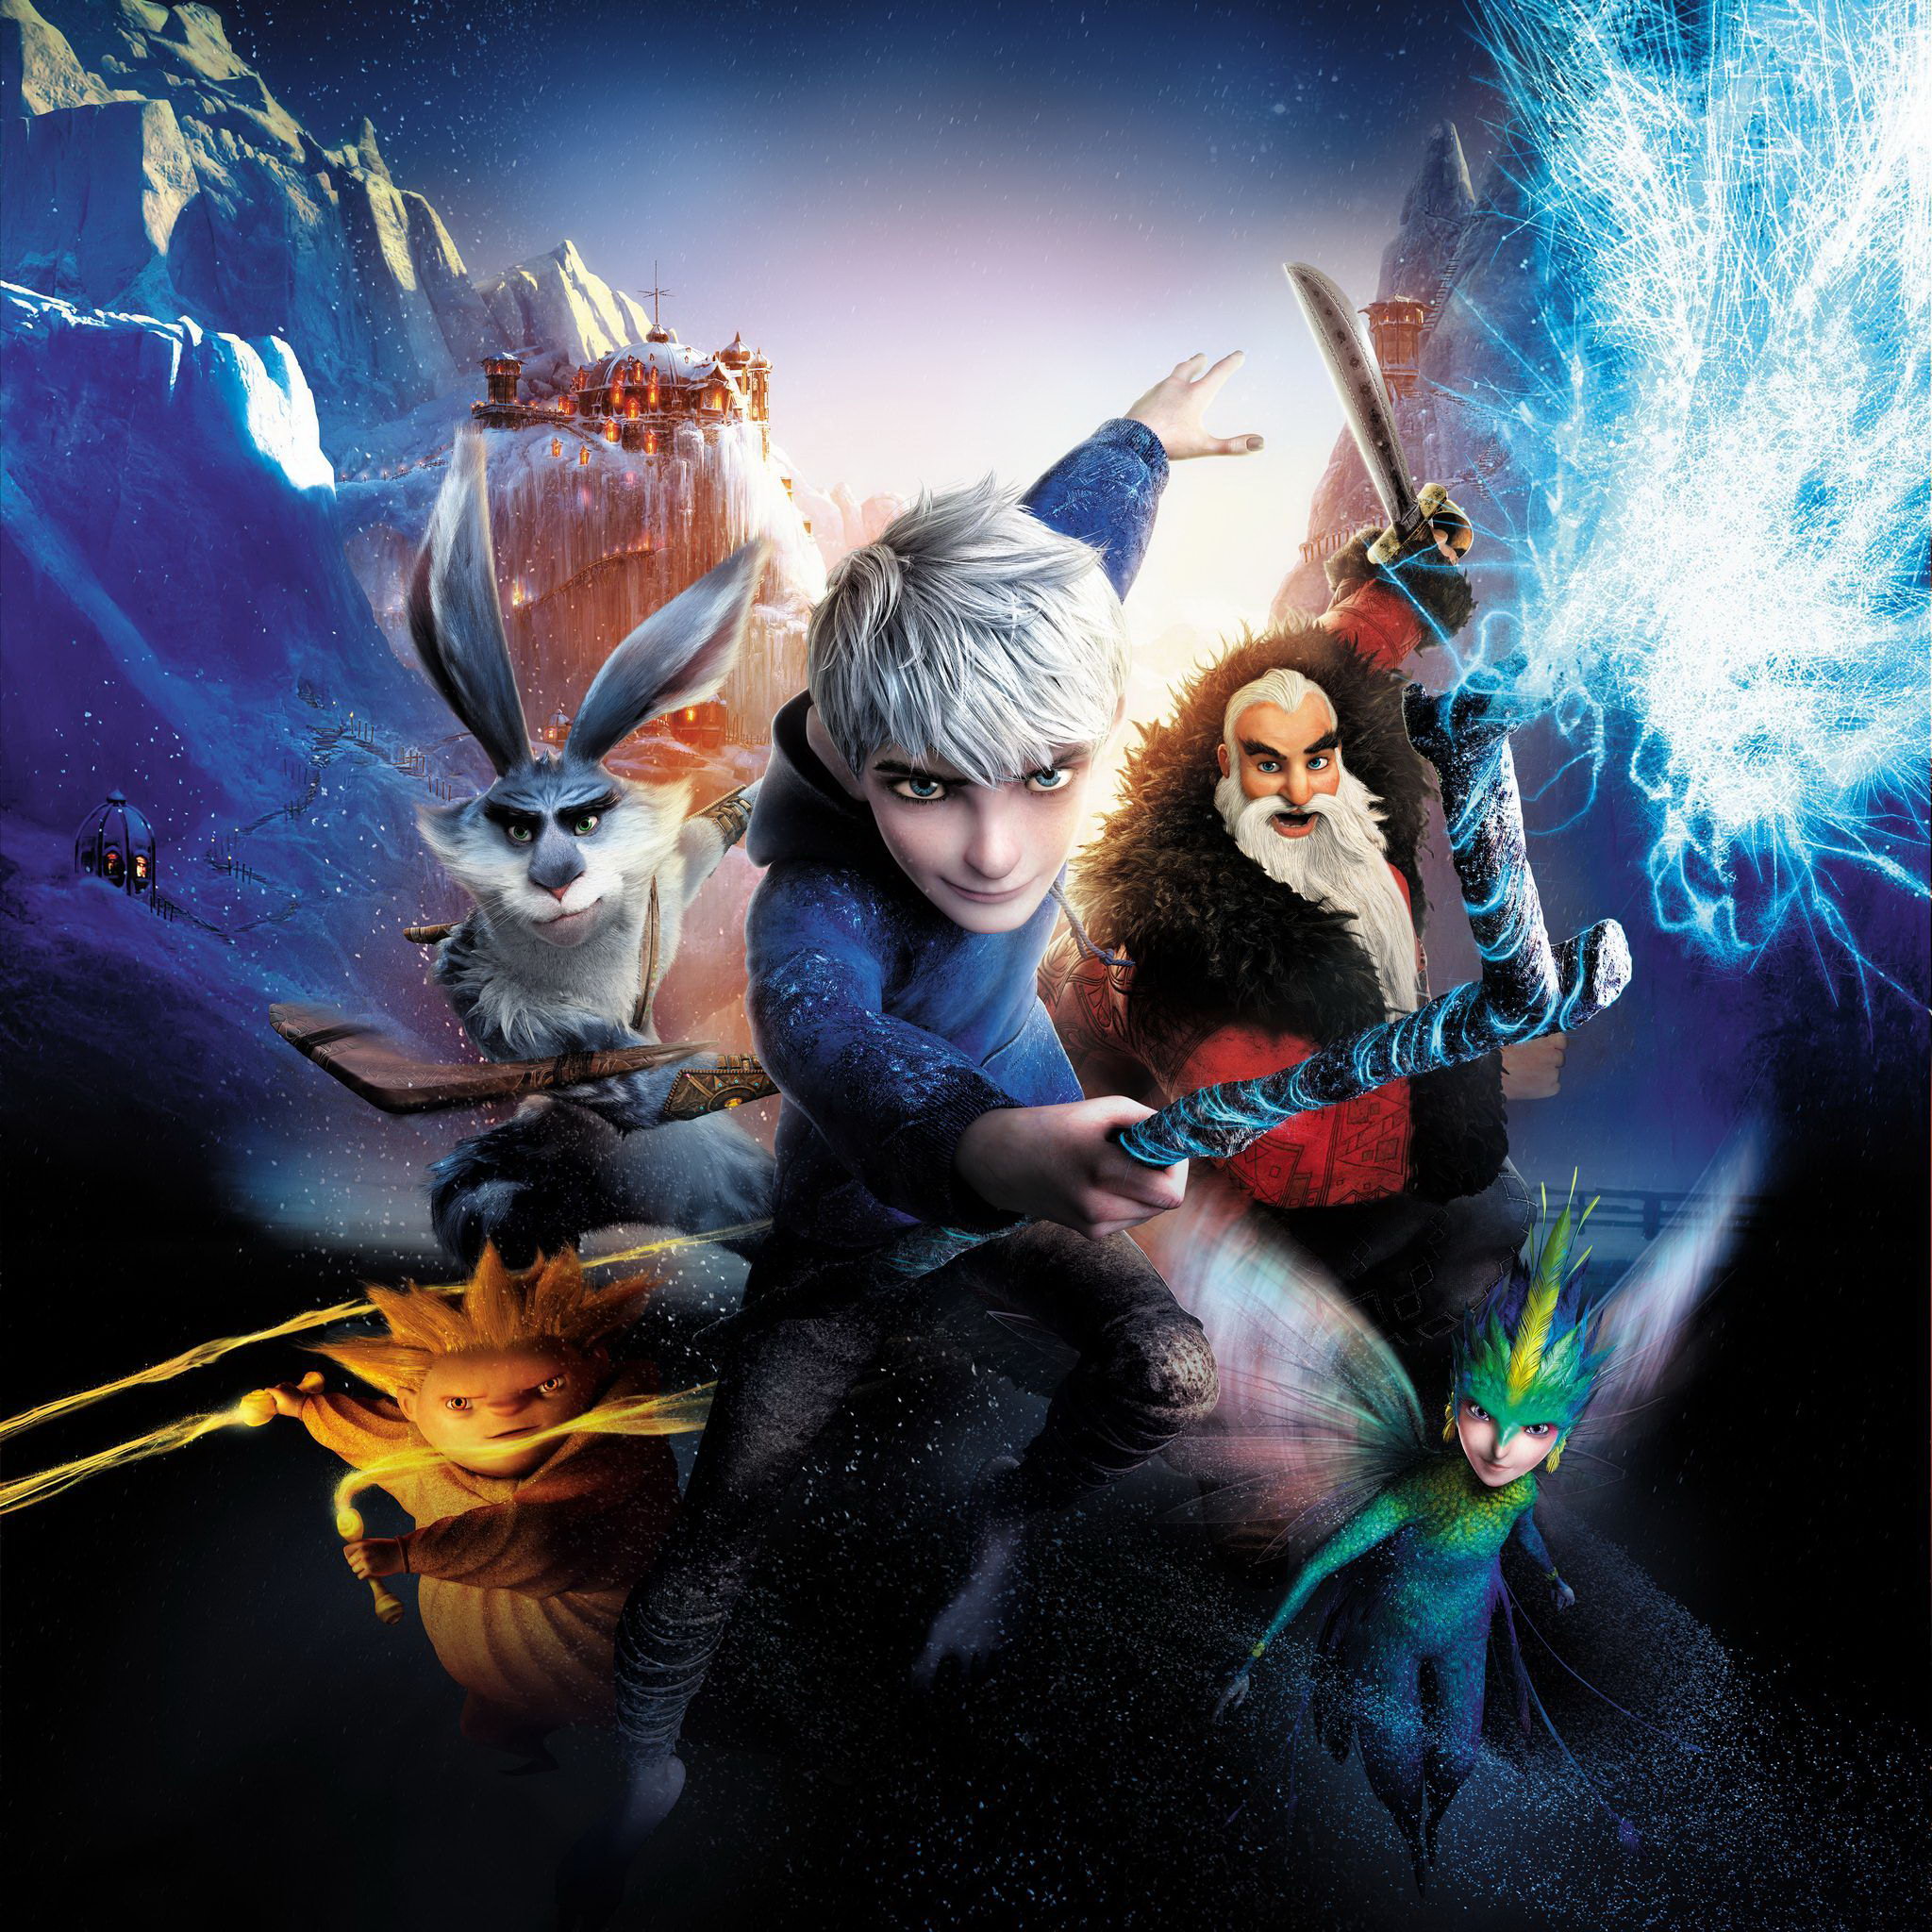 Image - Rise of the Guardians wallpaper - Disney Wiki - Wikia